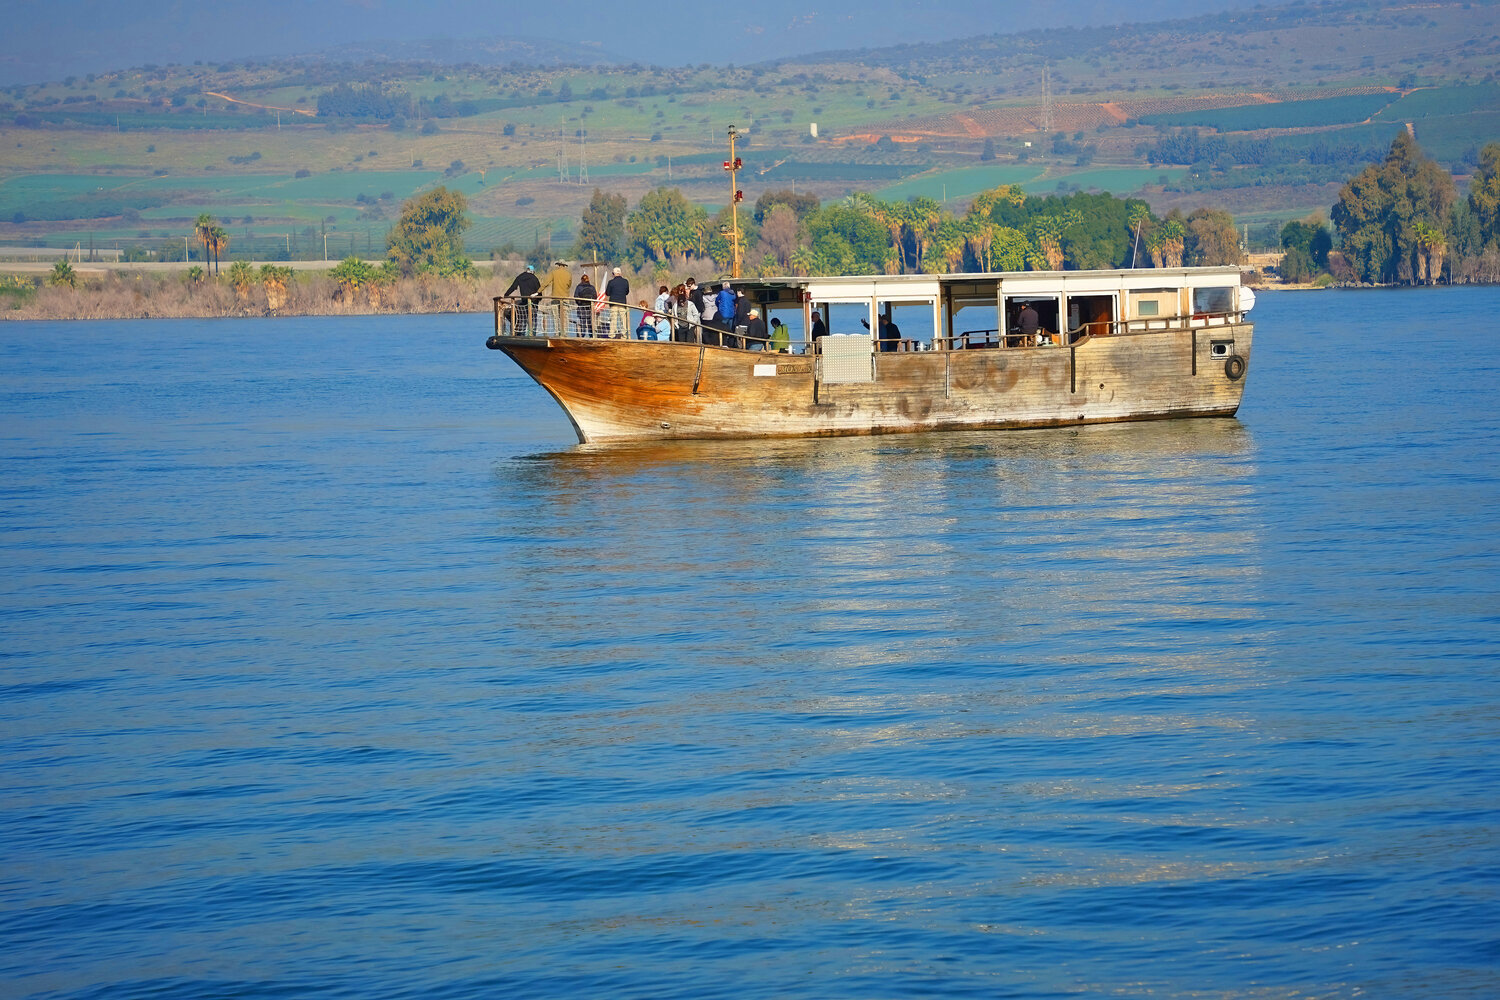 A group of Pastors sponsored by CUFI (Christians United for Israel) took a boat ride early morning on 15 Feb 2023 near the west side of the Sea of Galilee in Caesarea.